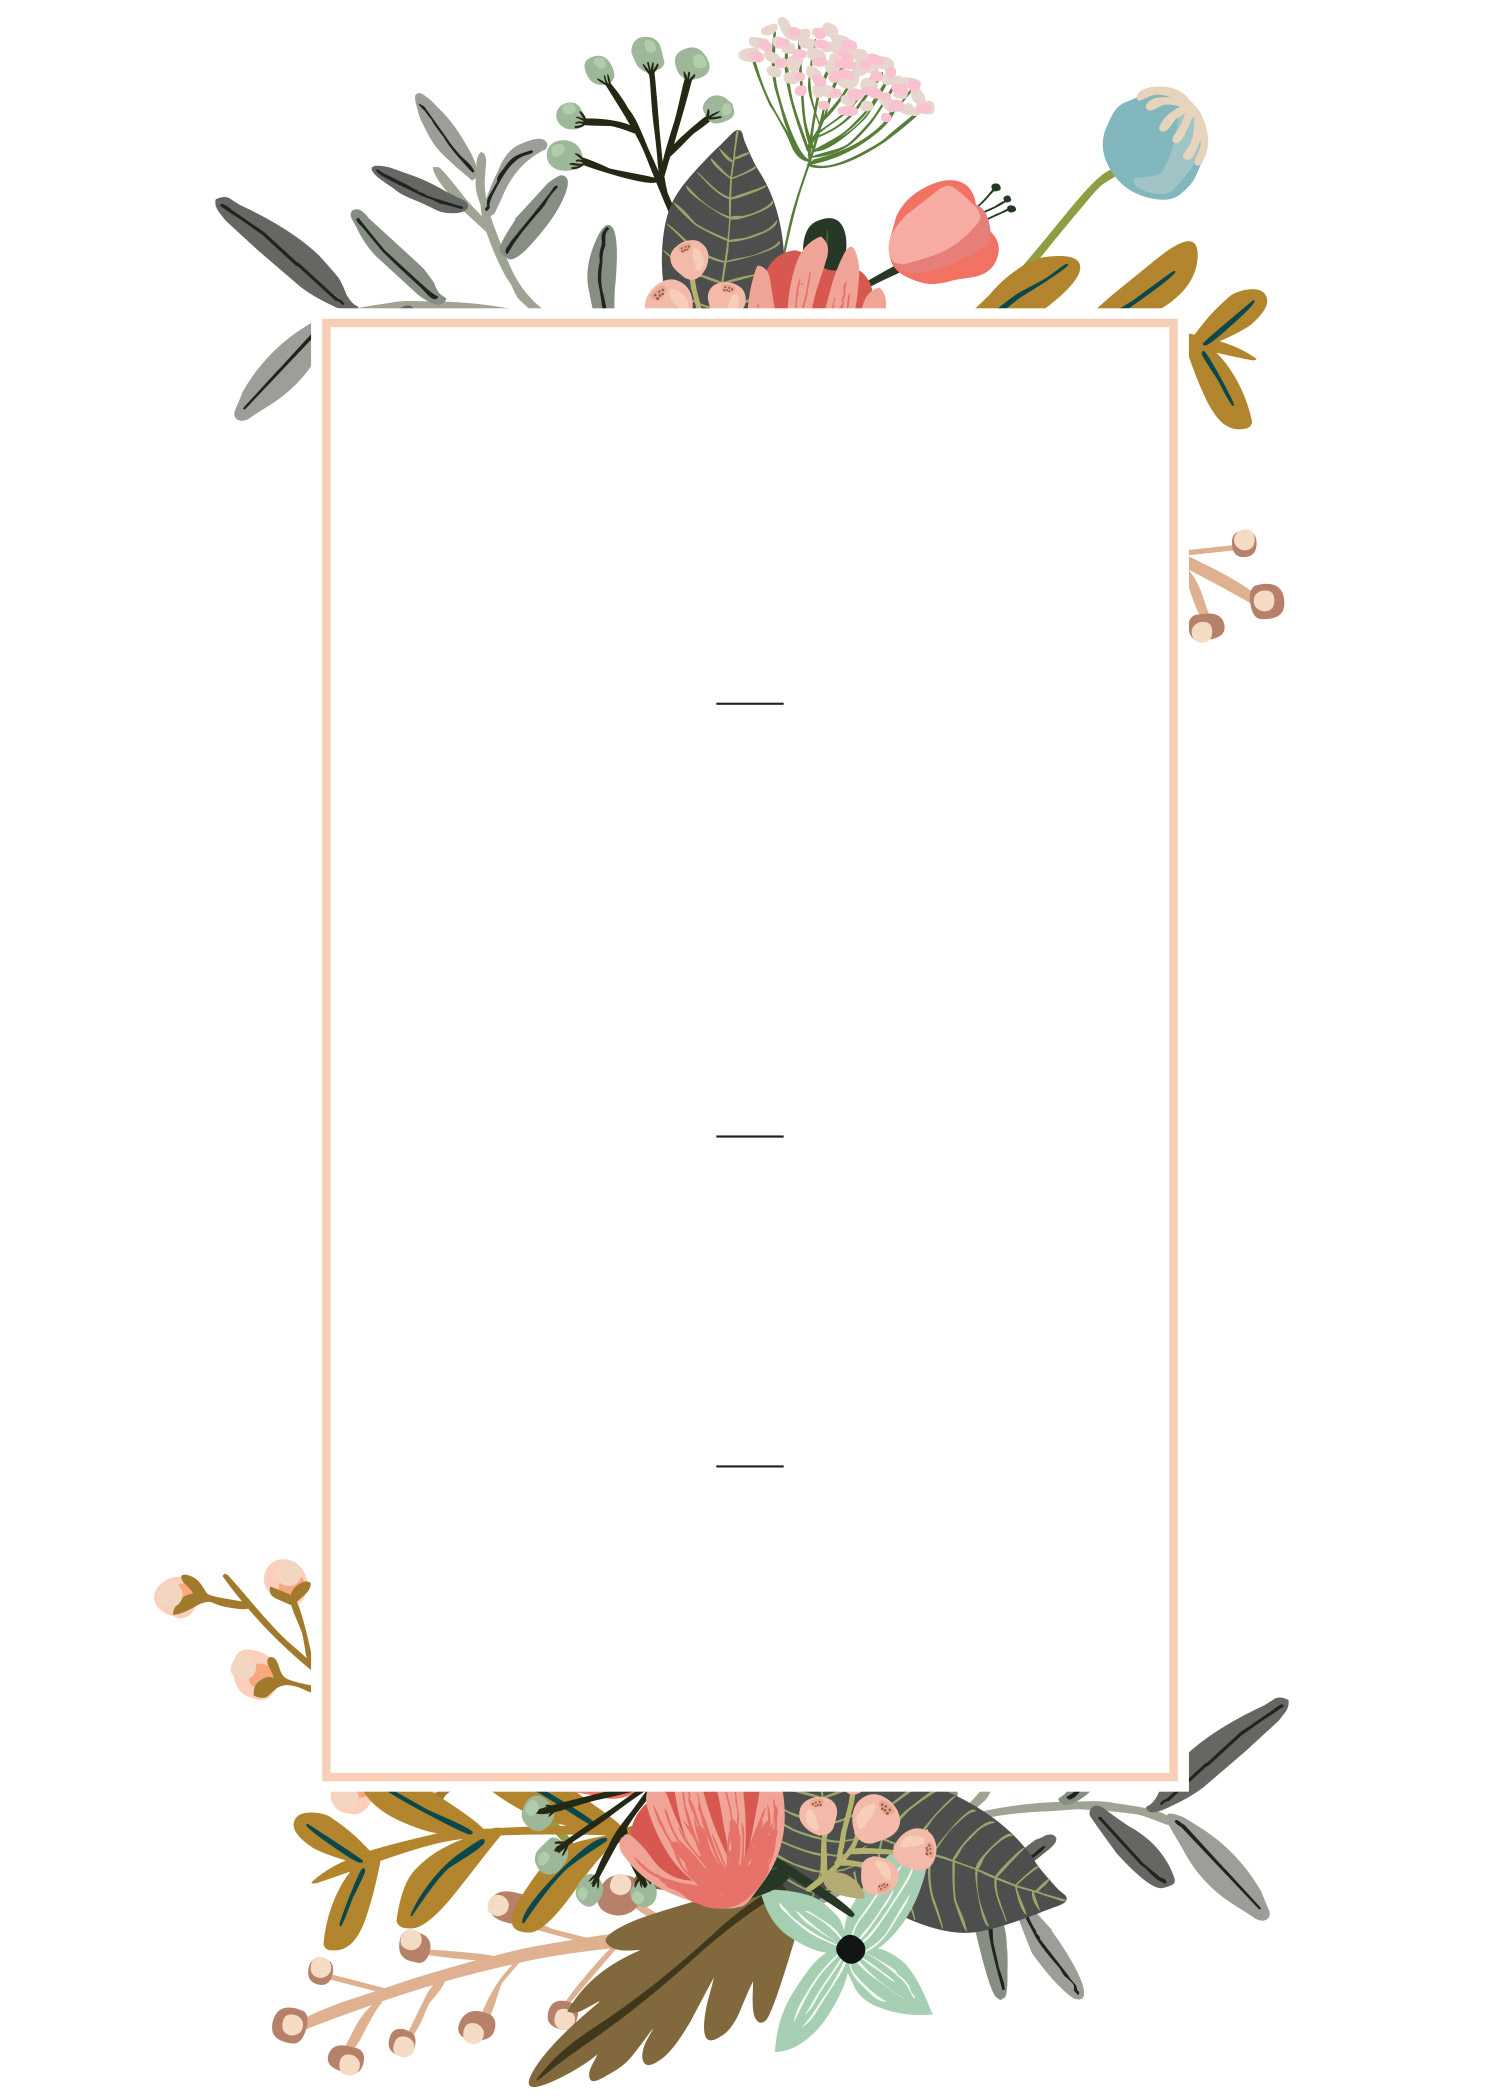 Editable Wedding Invitation Templates For The Perfect Card Throughout Invitation Cards Templates For Marriage